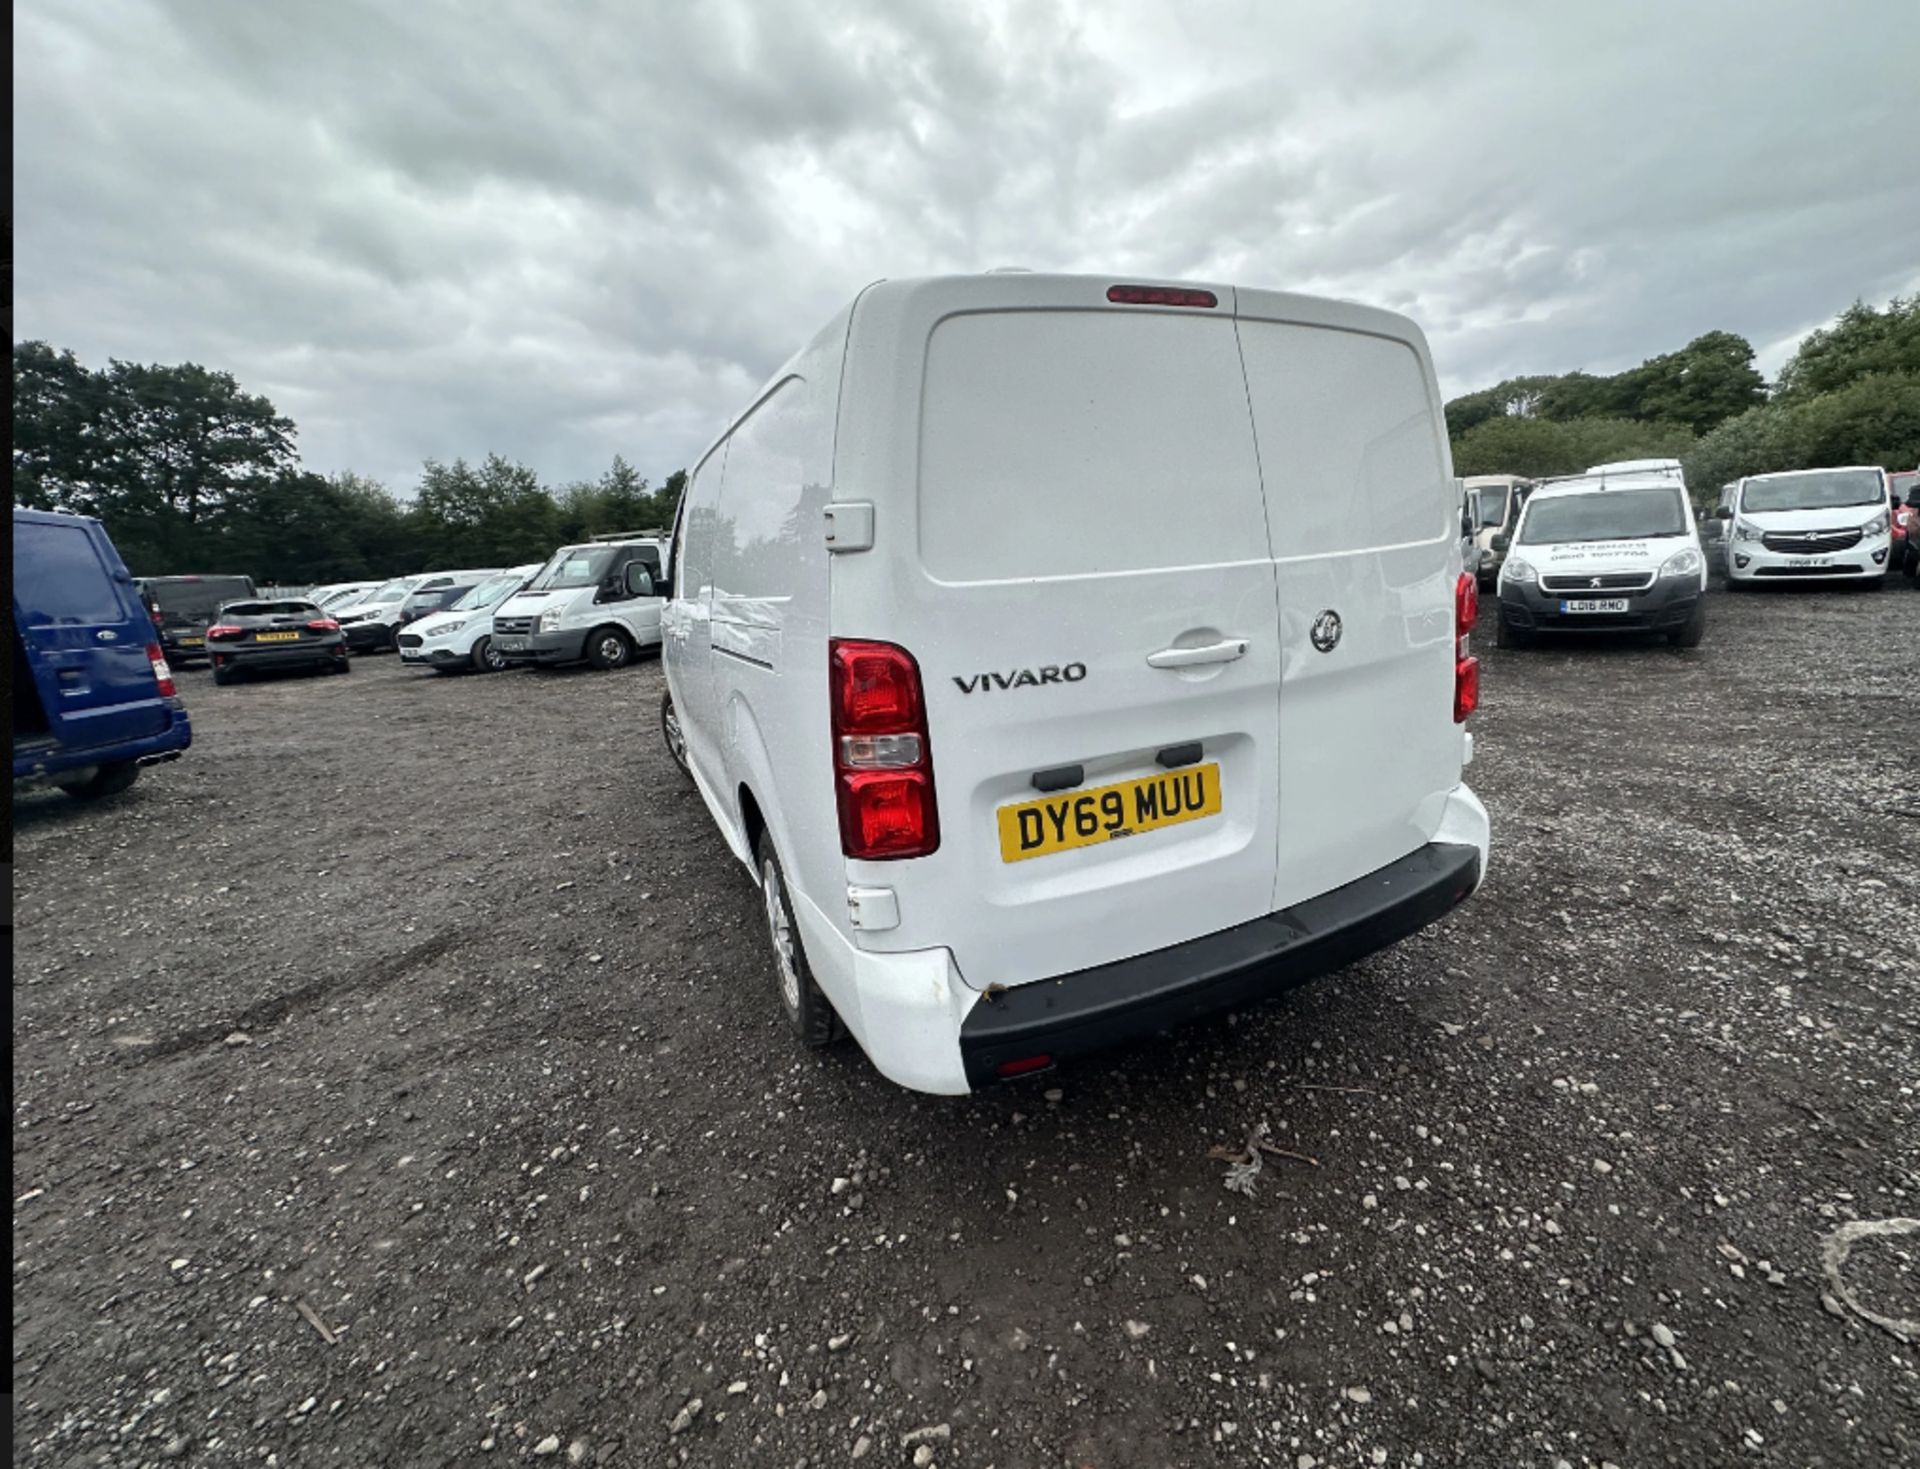 LOW-MILEAGE ONLY 70K MILES - 2019 VIVARO L2 DIESEL: READY TO ROLL - Image 9 of 11